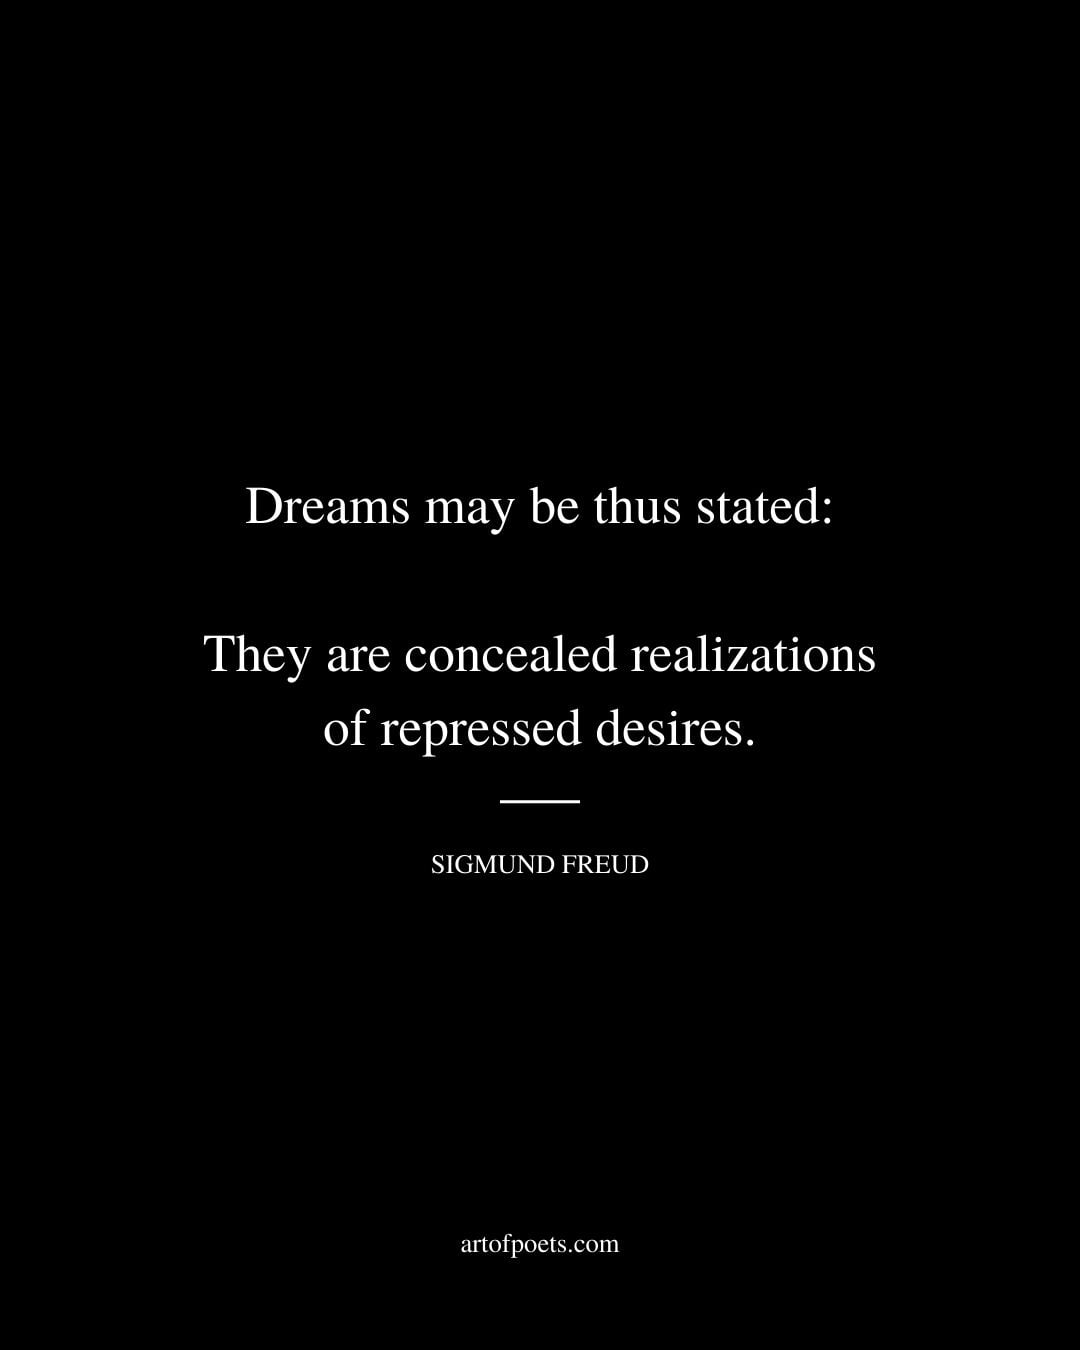 dreams may be thus stated They are concealed realizations of repressed desires